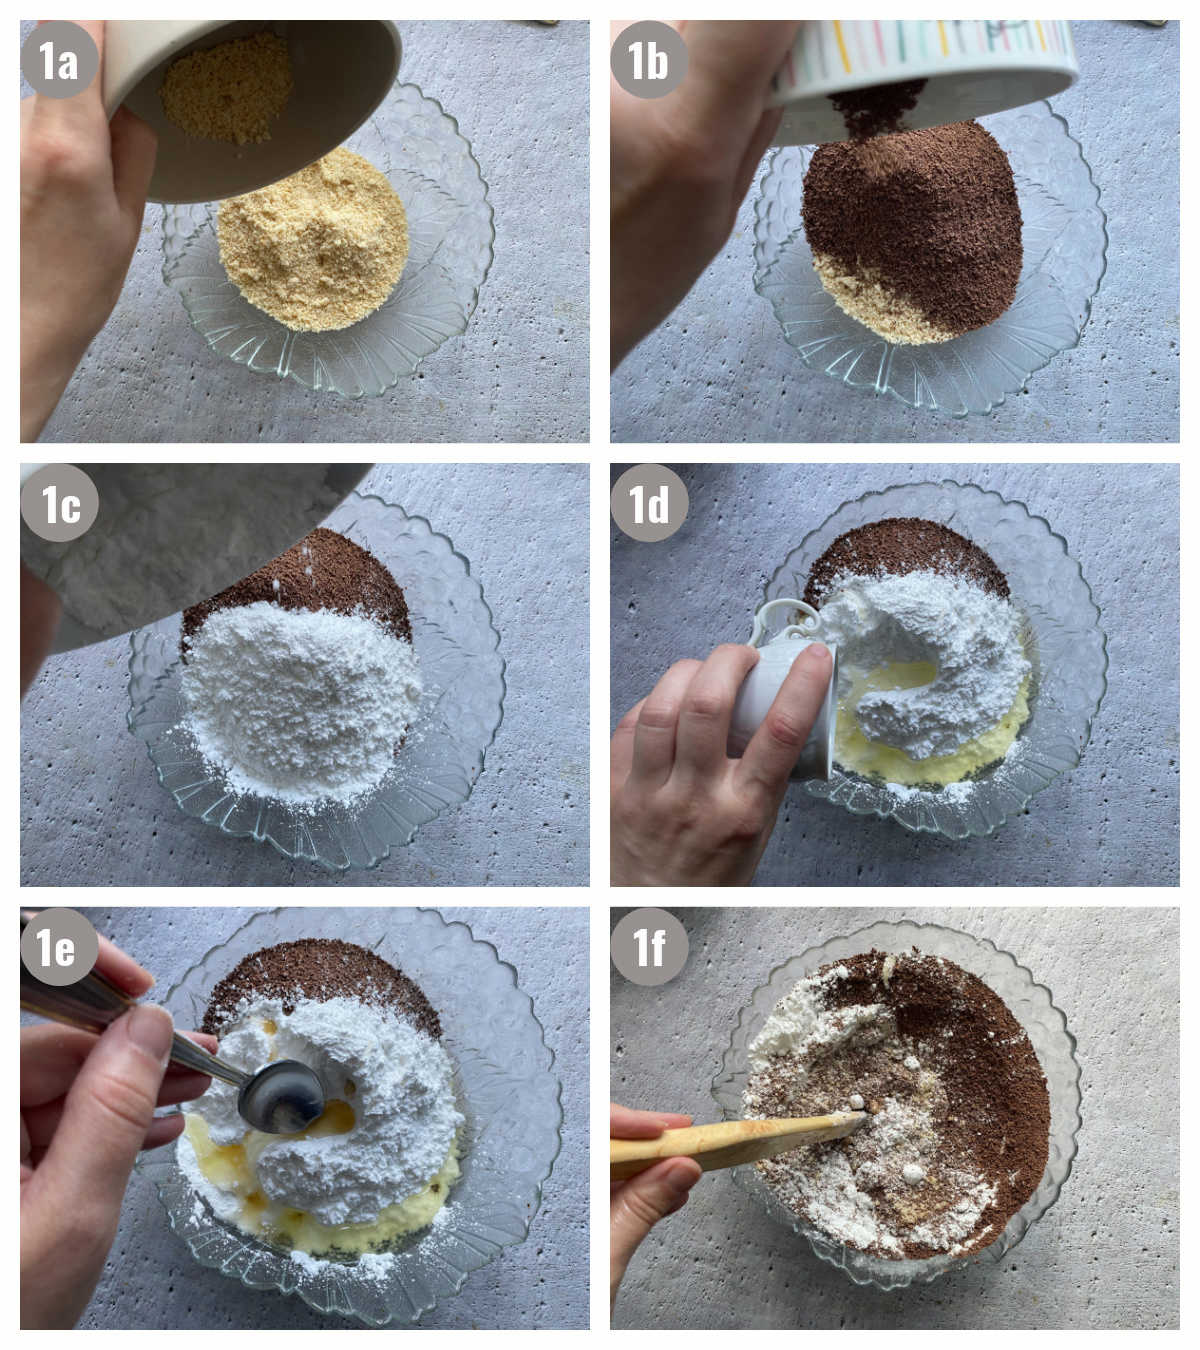 Six photographs, two by three, where ingredients for truffles are added to a clear ball by a hand holding different bowls. The last two photographs depict a bowl with ingredients and a hand holding a wooden spatula and mixing the ingredients.